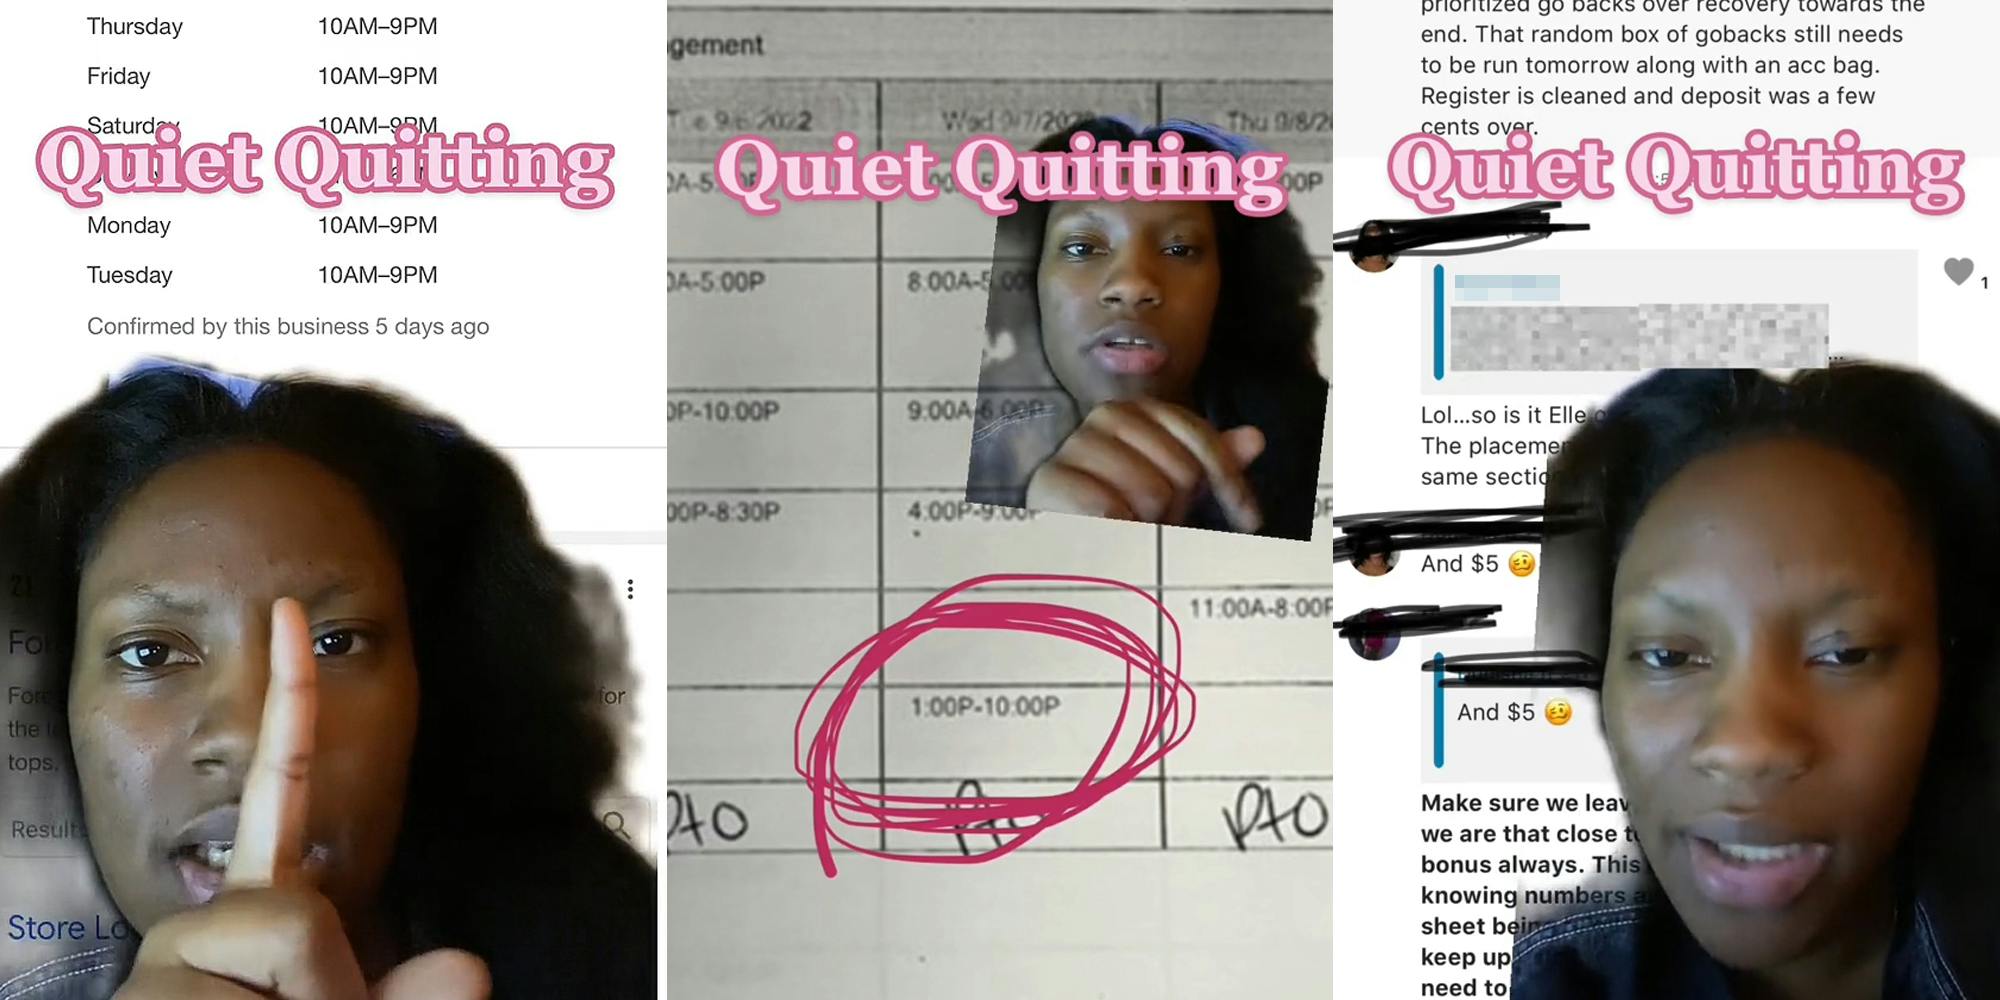 woman grenscreen TikiTok pointing finger up at caption "Quiet Quitting" over her work schedule "Thursday- Tuesday 10AM-9PM" (l) woman greenscreen TikTok pointing down over work schedule with red circle around "1:00P-10:00P" caption "Quiet Quitting" (c) woman greenscreen TikTok over SnapChat group chat caption "Quiet Quitting" "That random box of gobacks still needs to be run tomorrow along with an acc bag. Register is cleaned and deposit was a few cents over. Lol... so is it Elle... The placement... same section... And $5... Make sure we leave... we are that close... bonus always. This... knowing numbers..." (r)